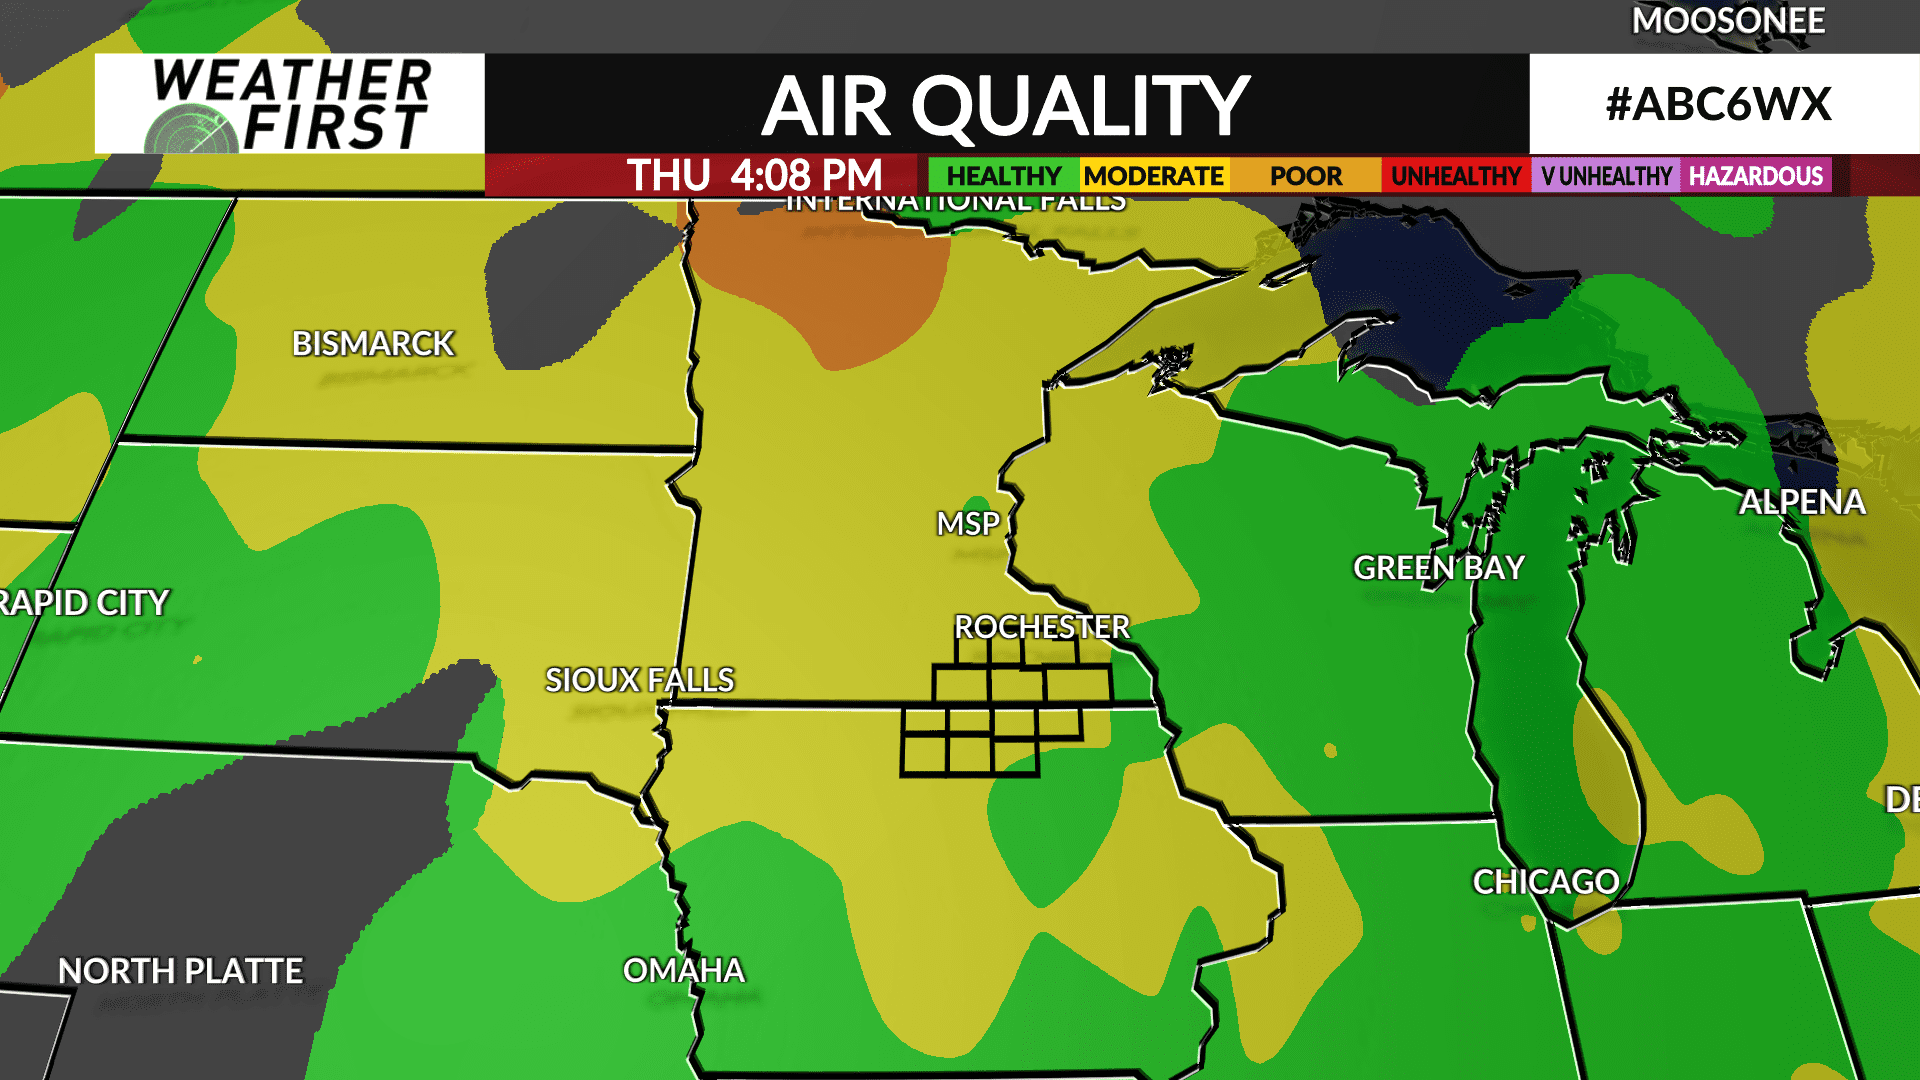 Air Quality Alert Cancelled Early in Southern Minnesota